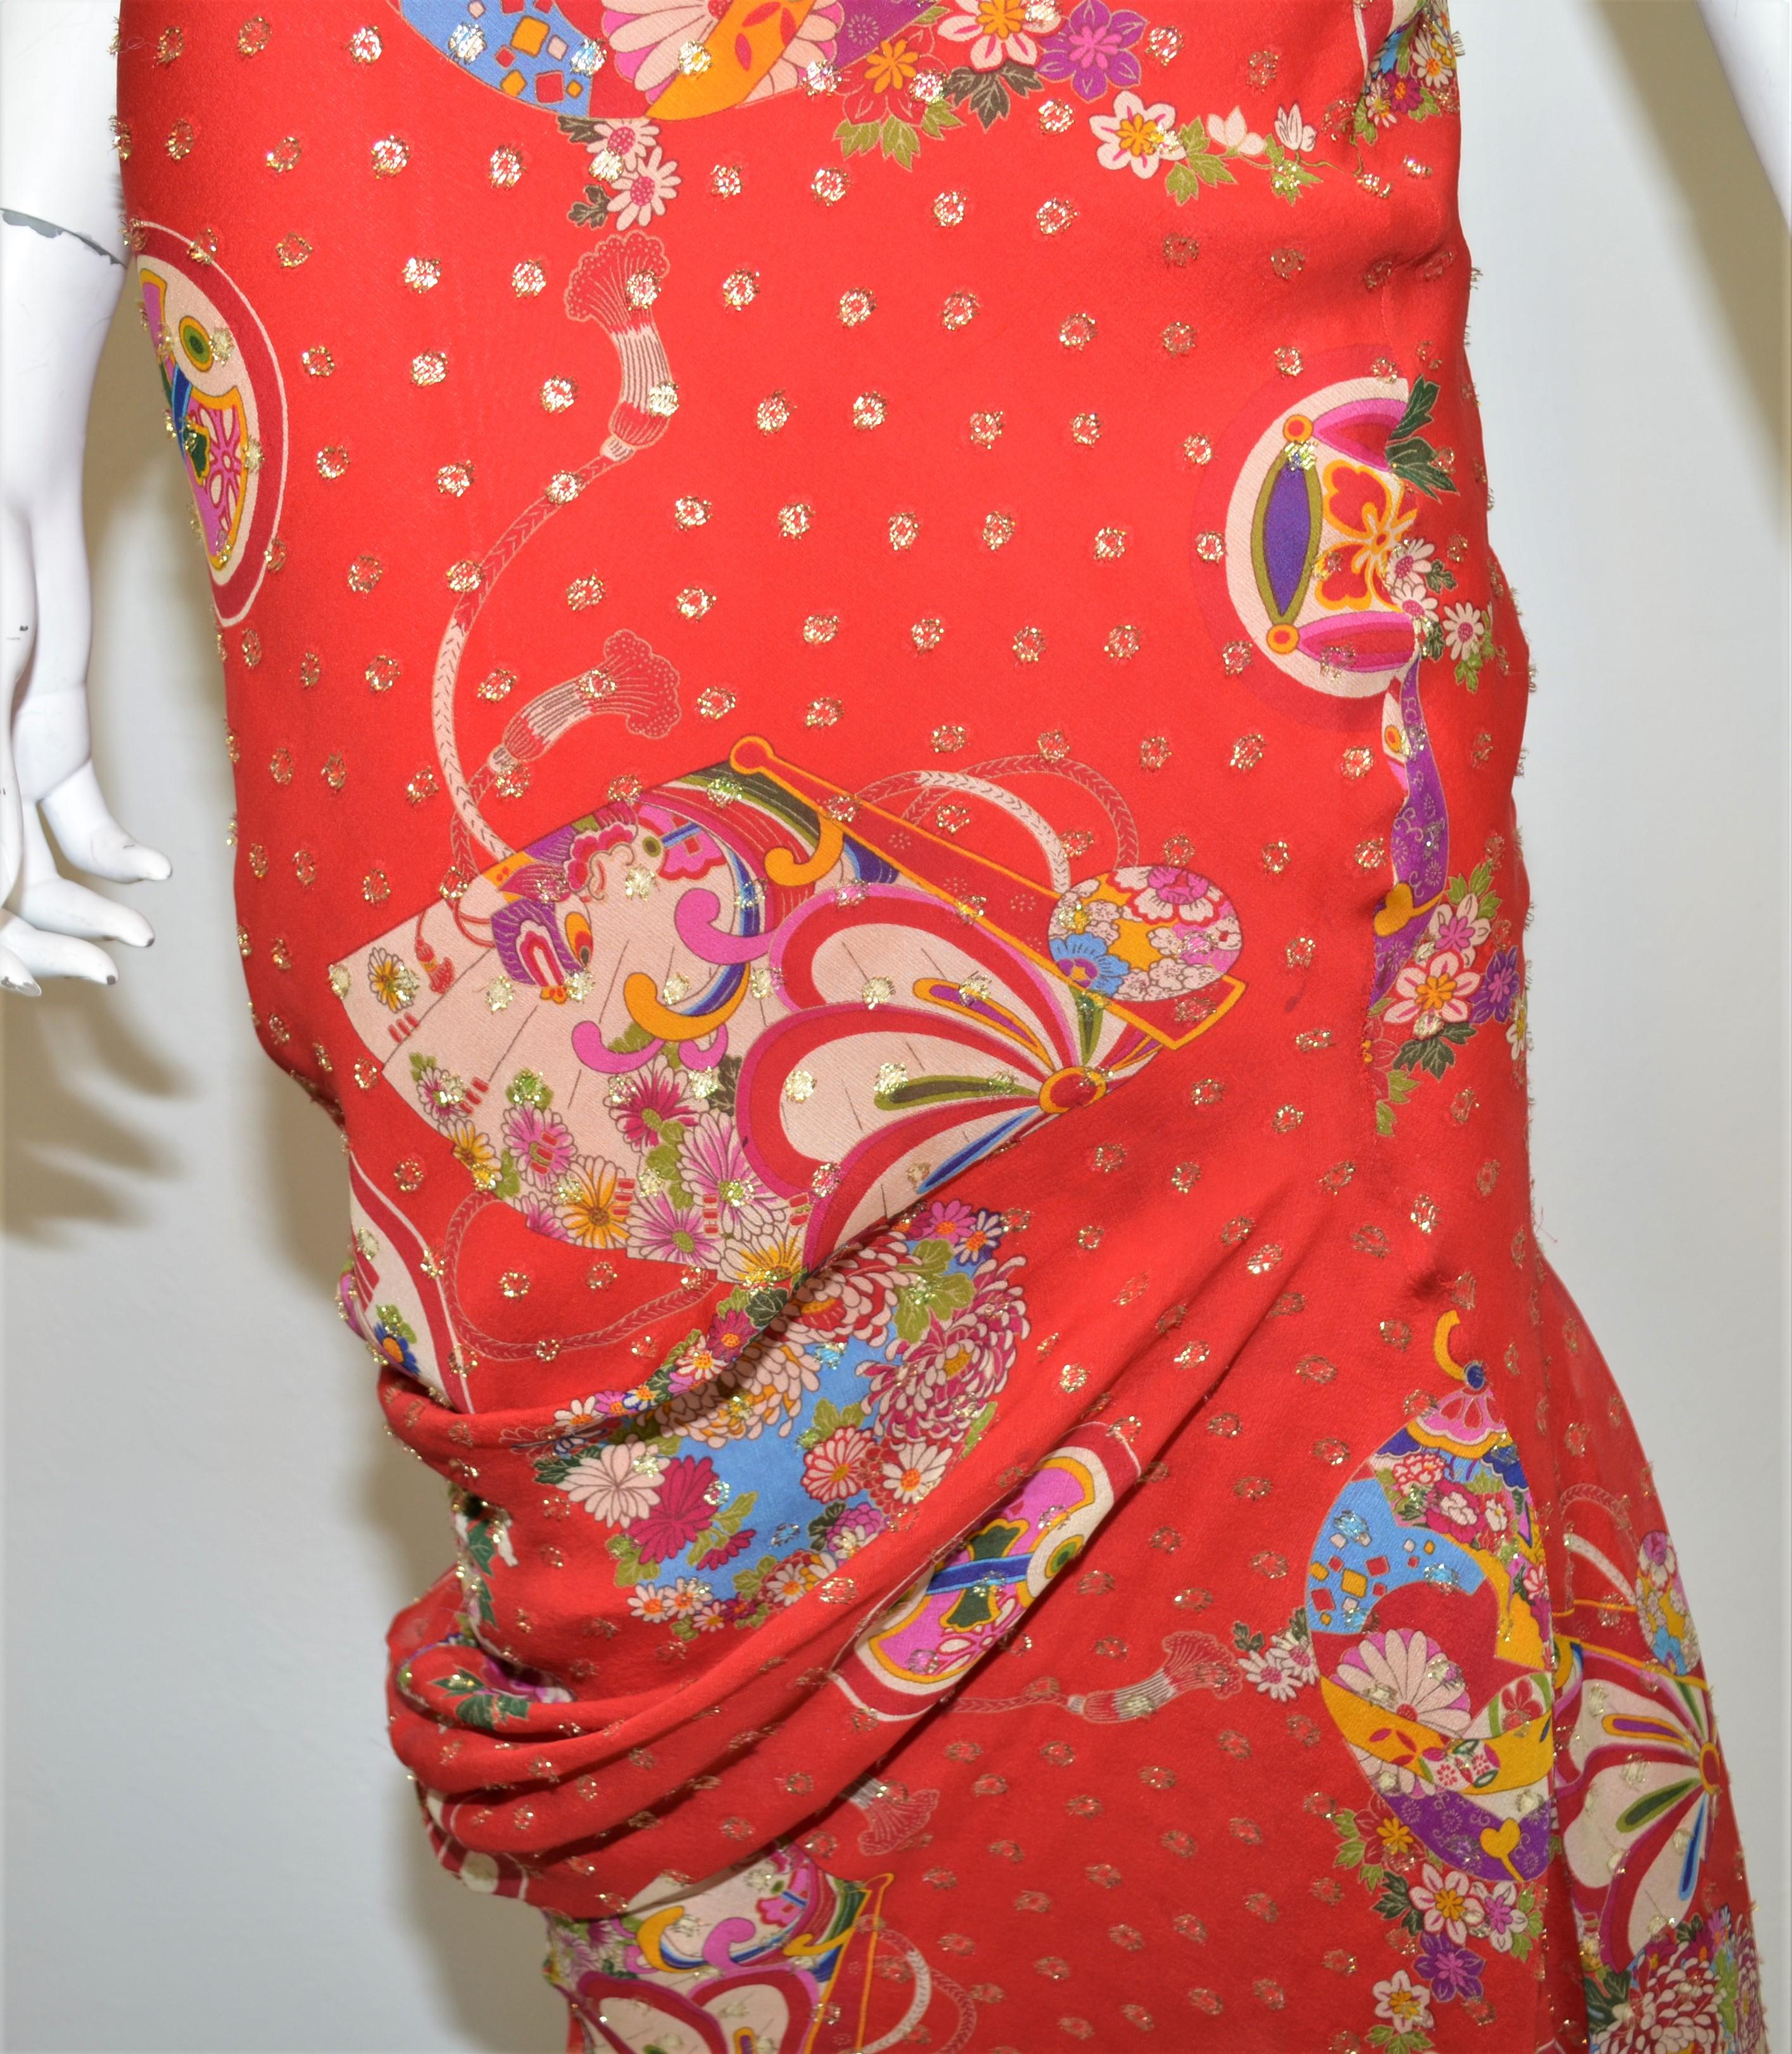 2003 Spring collection by John Galliano for Christian Dior Skirt features a beautiful Chinese print that was also spotlighted during the 2015 Met Gala as the theme was 